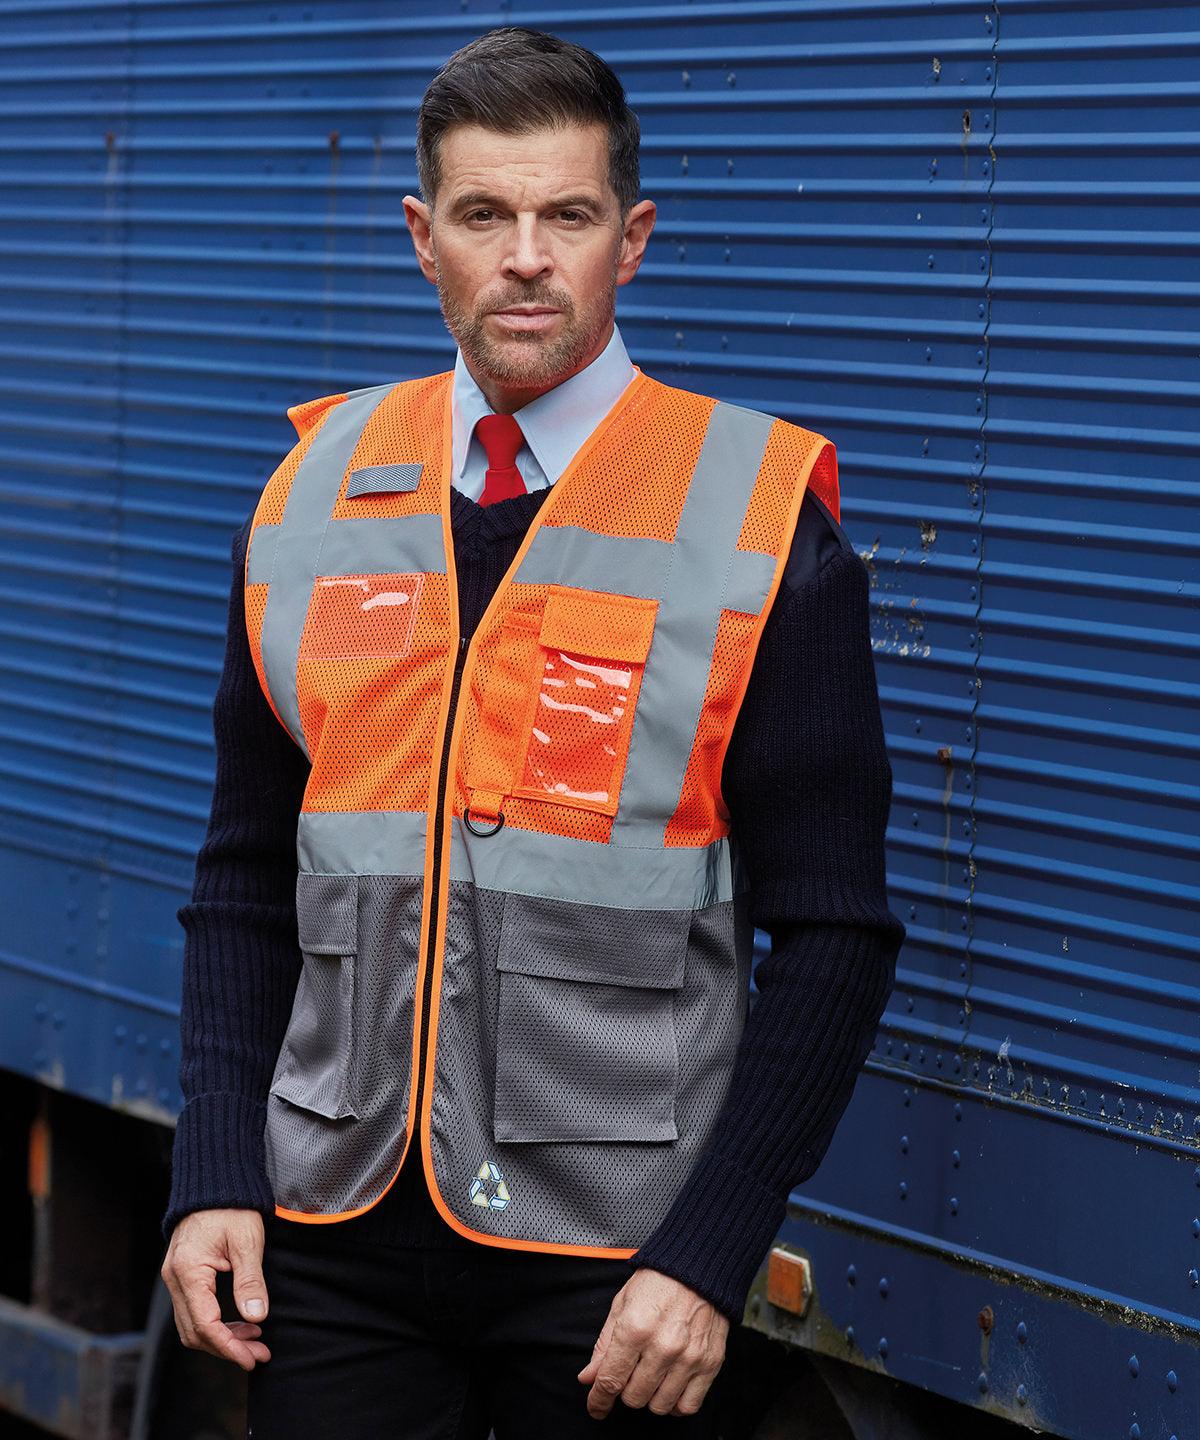 Orange/Grey - Hi-vis top cool open-mesh executive waistcoat (HVW820) Safety Vests Yoko Plus Sizes, Raladeal - Recently Added, Safety Essentials, Safetywear, Workwear Schoolwear Centres